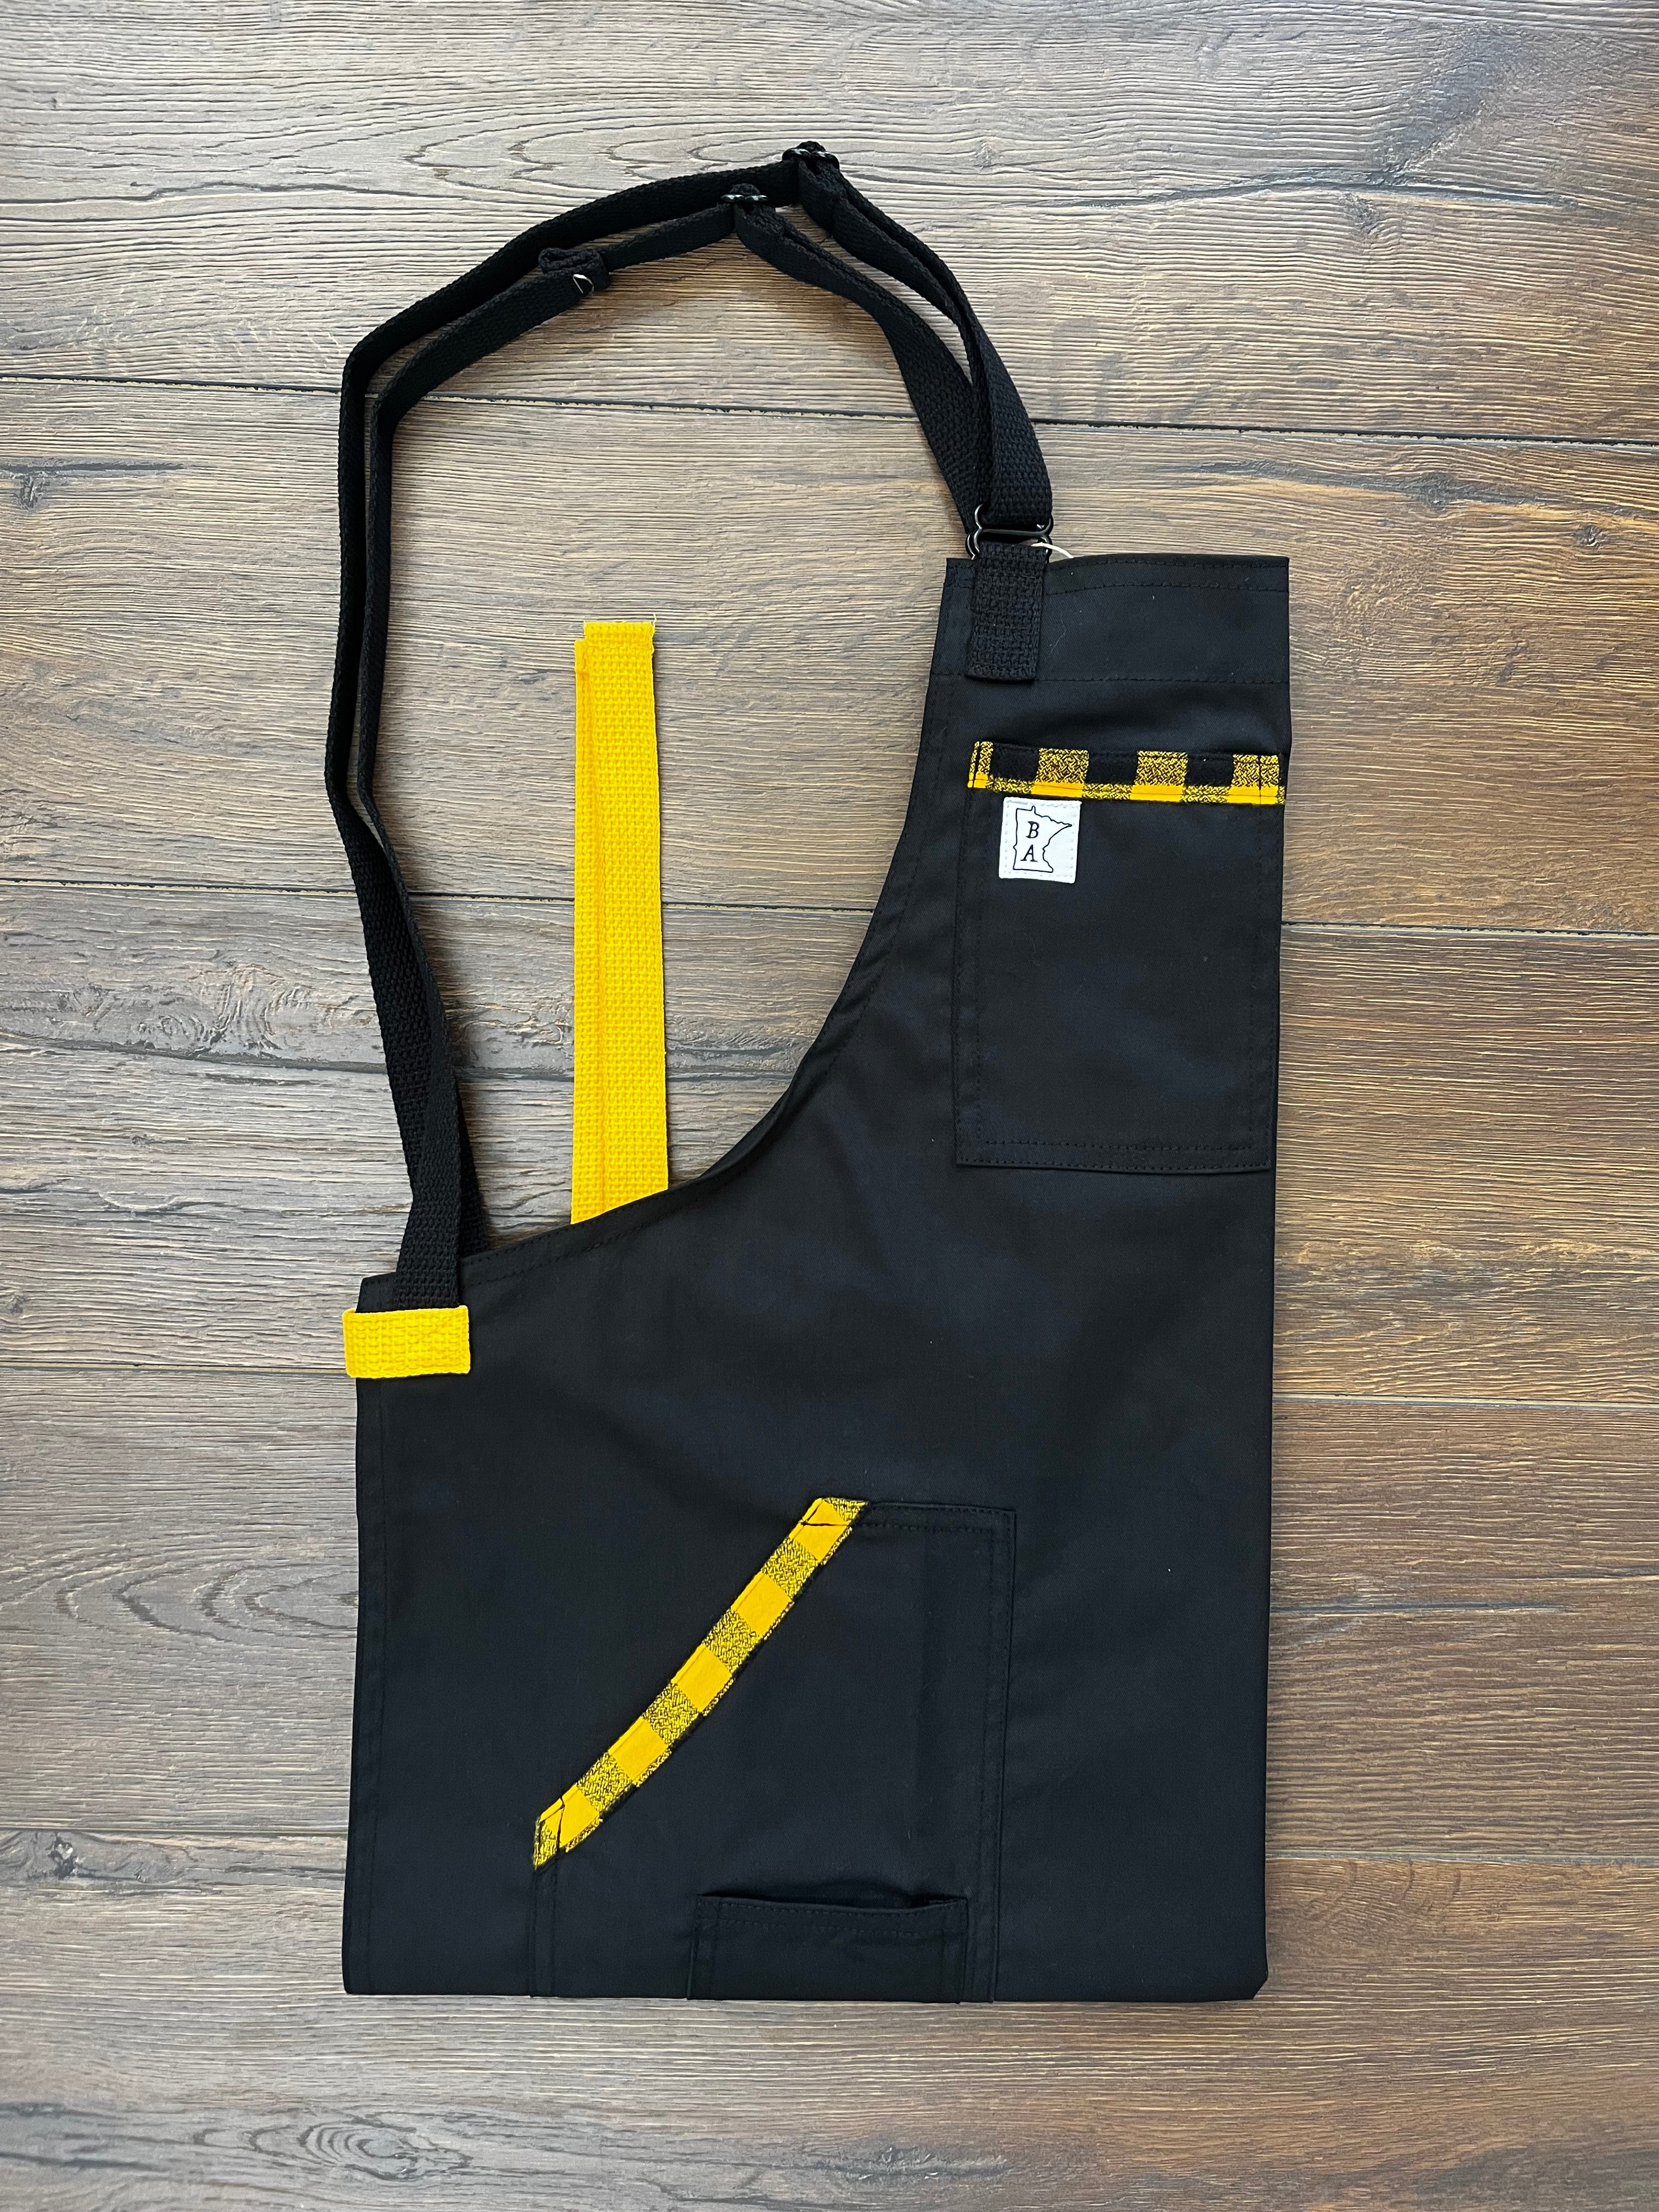 Left Handed Larry – BA Craftmade Aprons